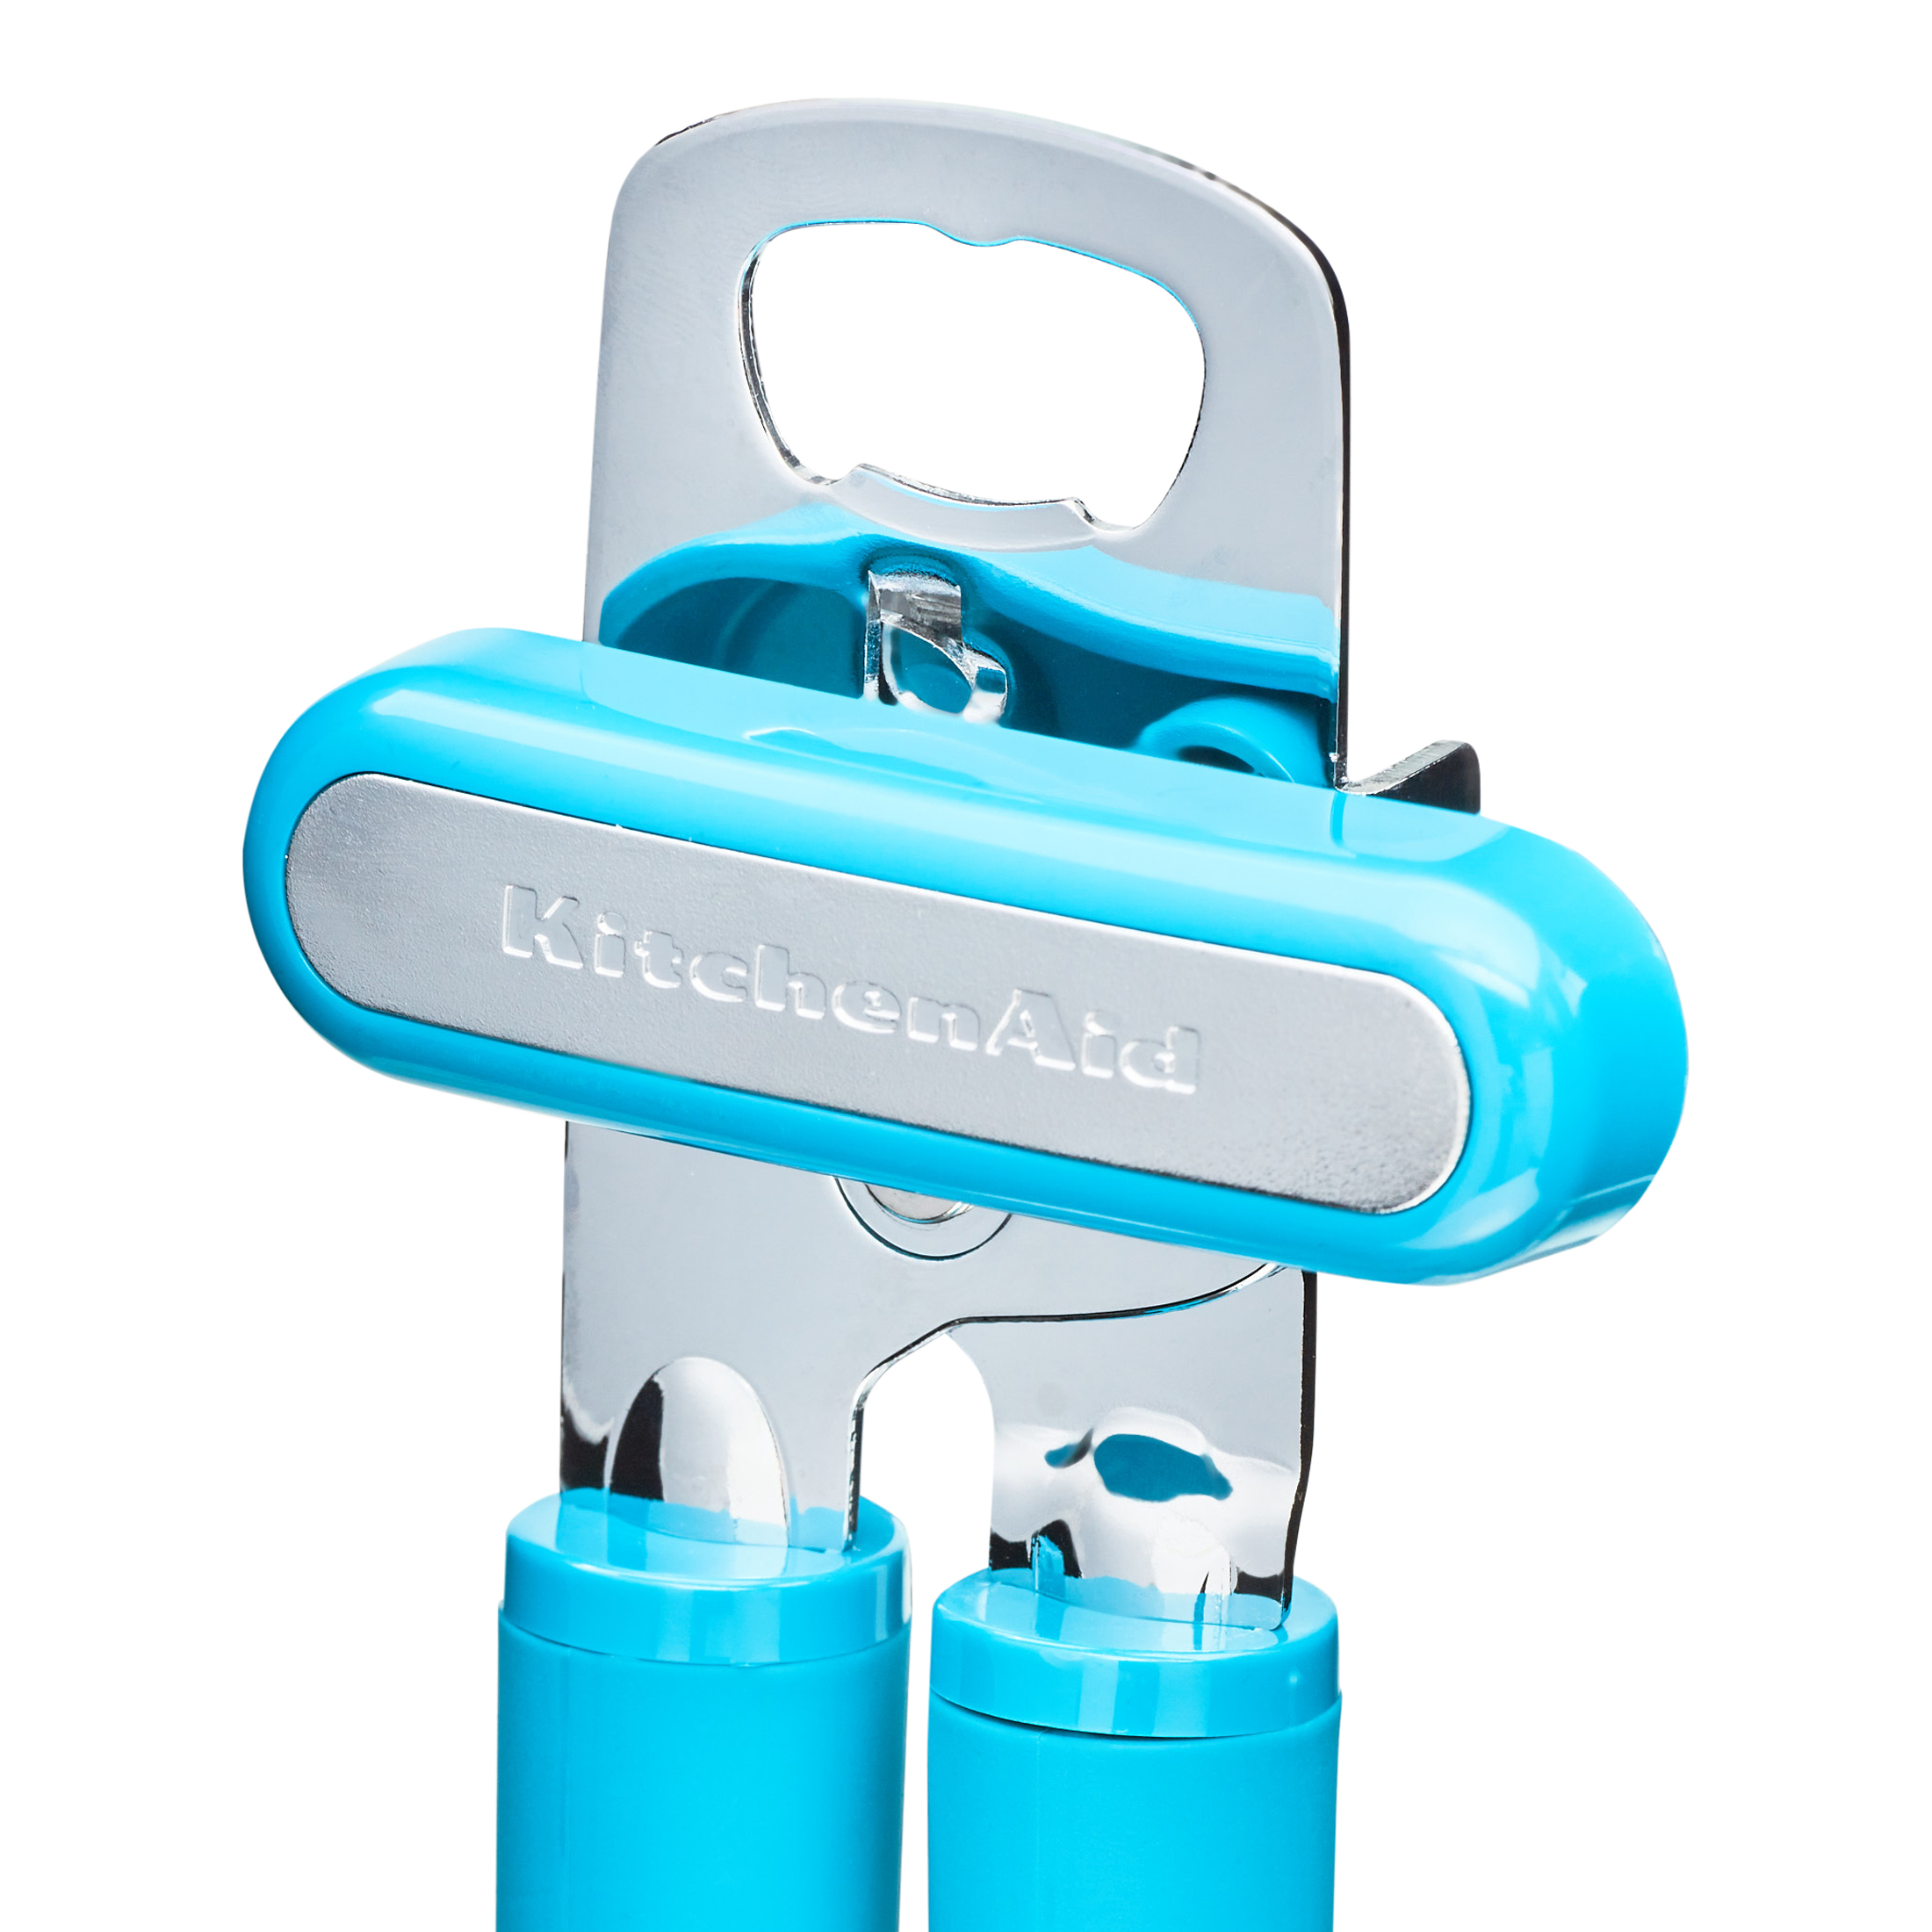 Kitchenaid Stainless Steel Multi-function Can Opener, Ocean Drive, Hand Wash - image 5 of 9